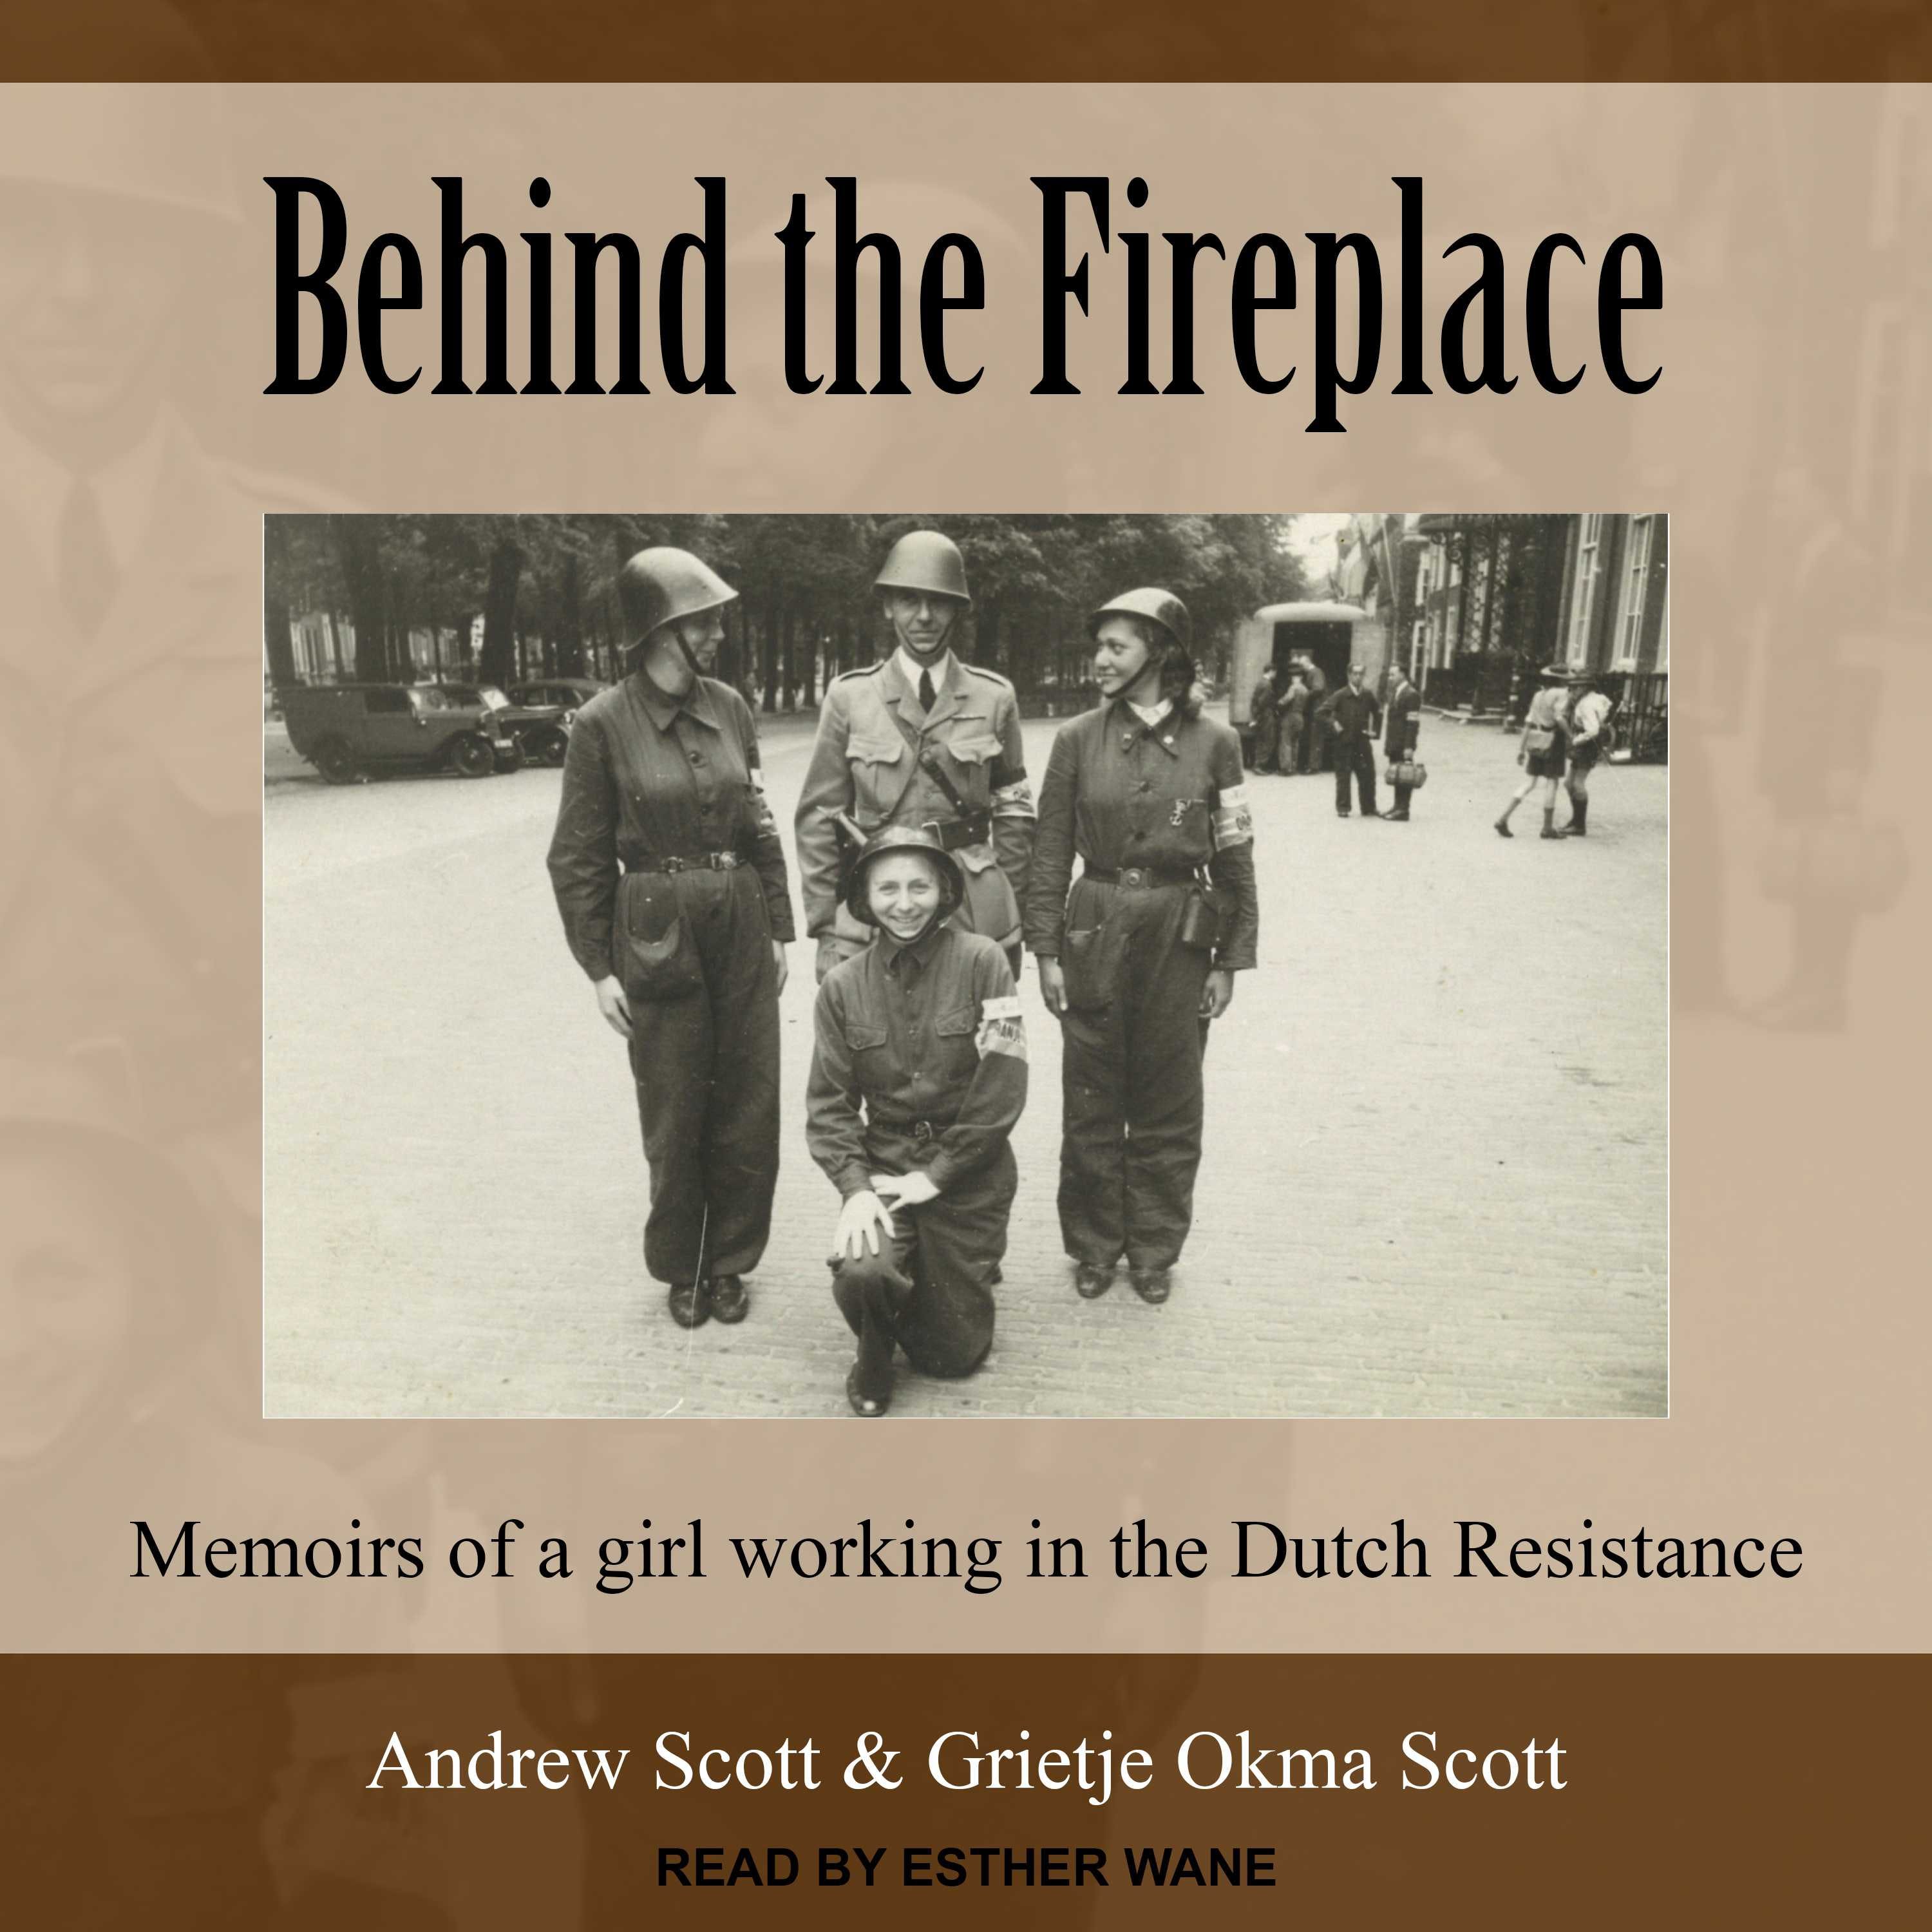 Behind the Fireplace: Memoirs of a Girl Working in the Dutch Resistance - Andrew Scott, Grietje Okma Scott